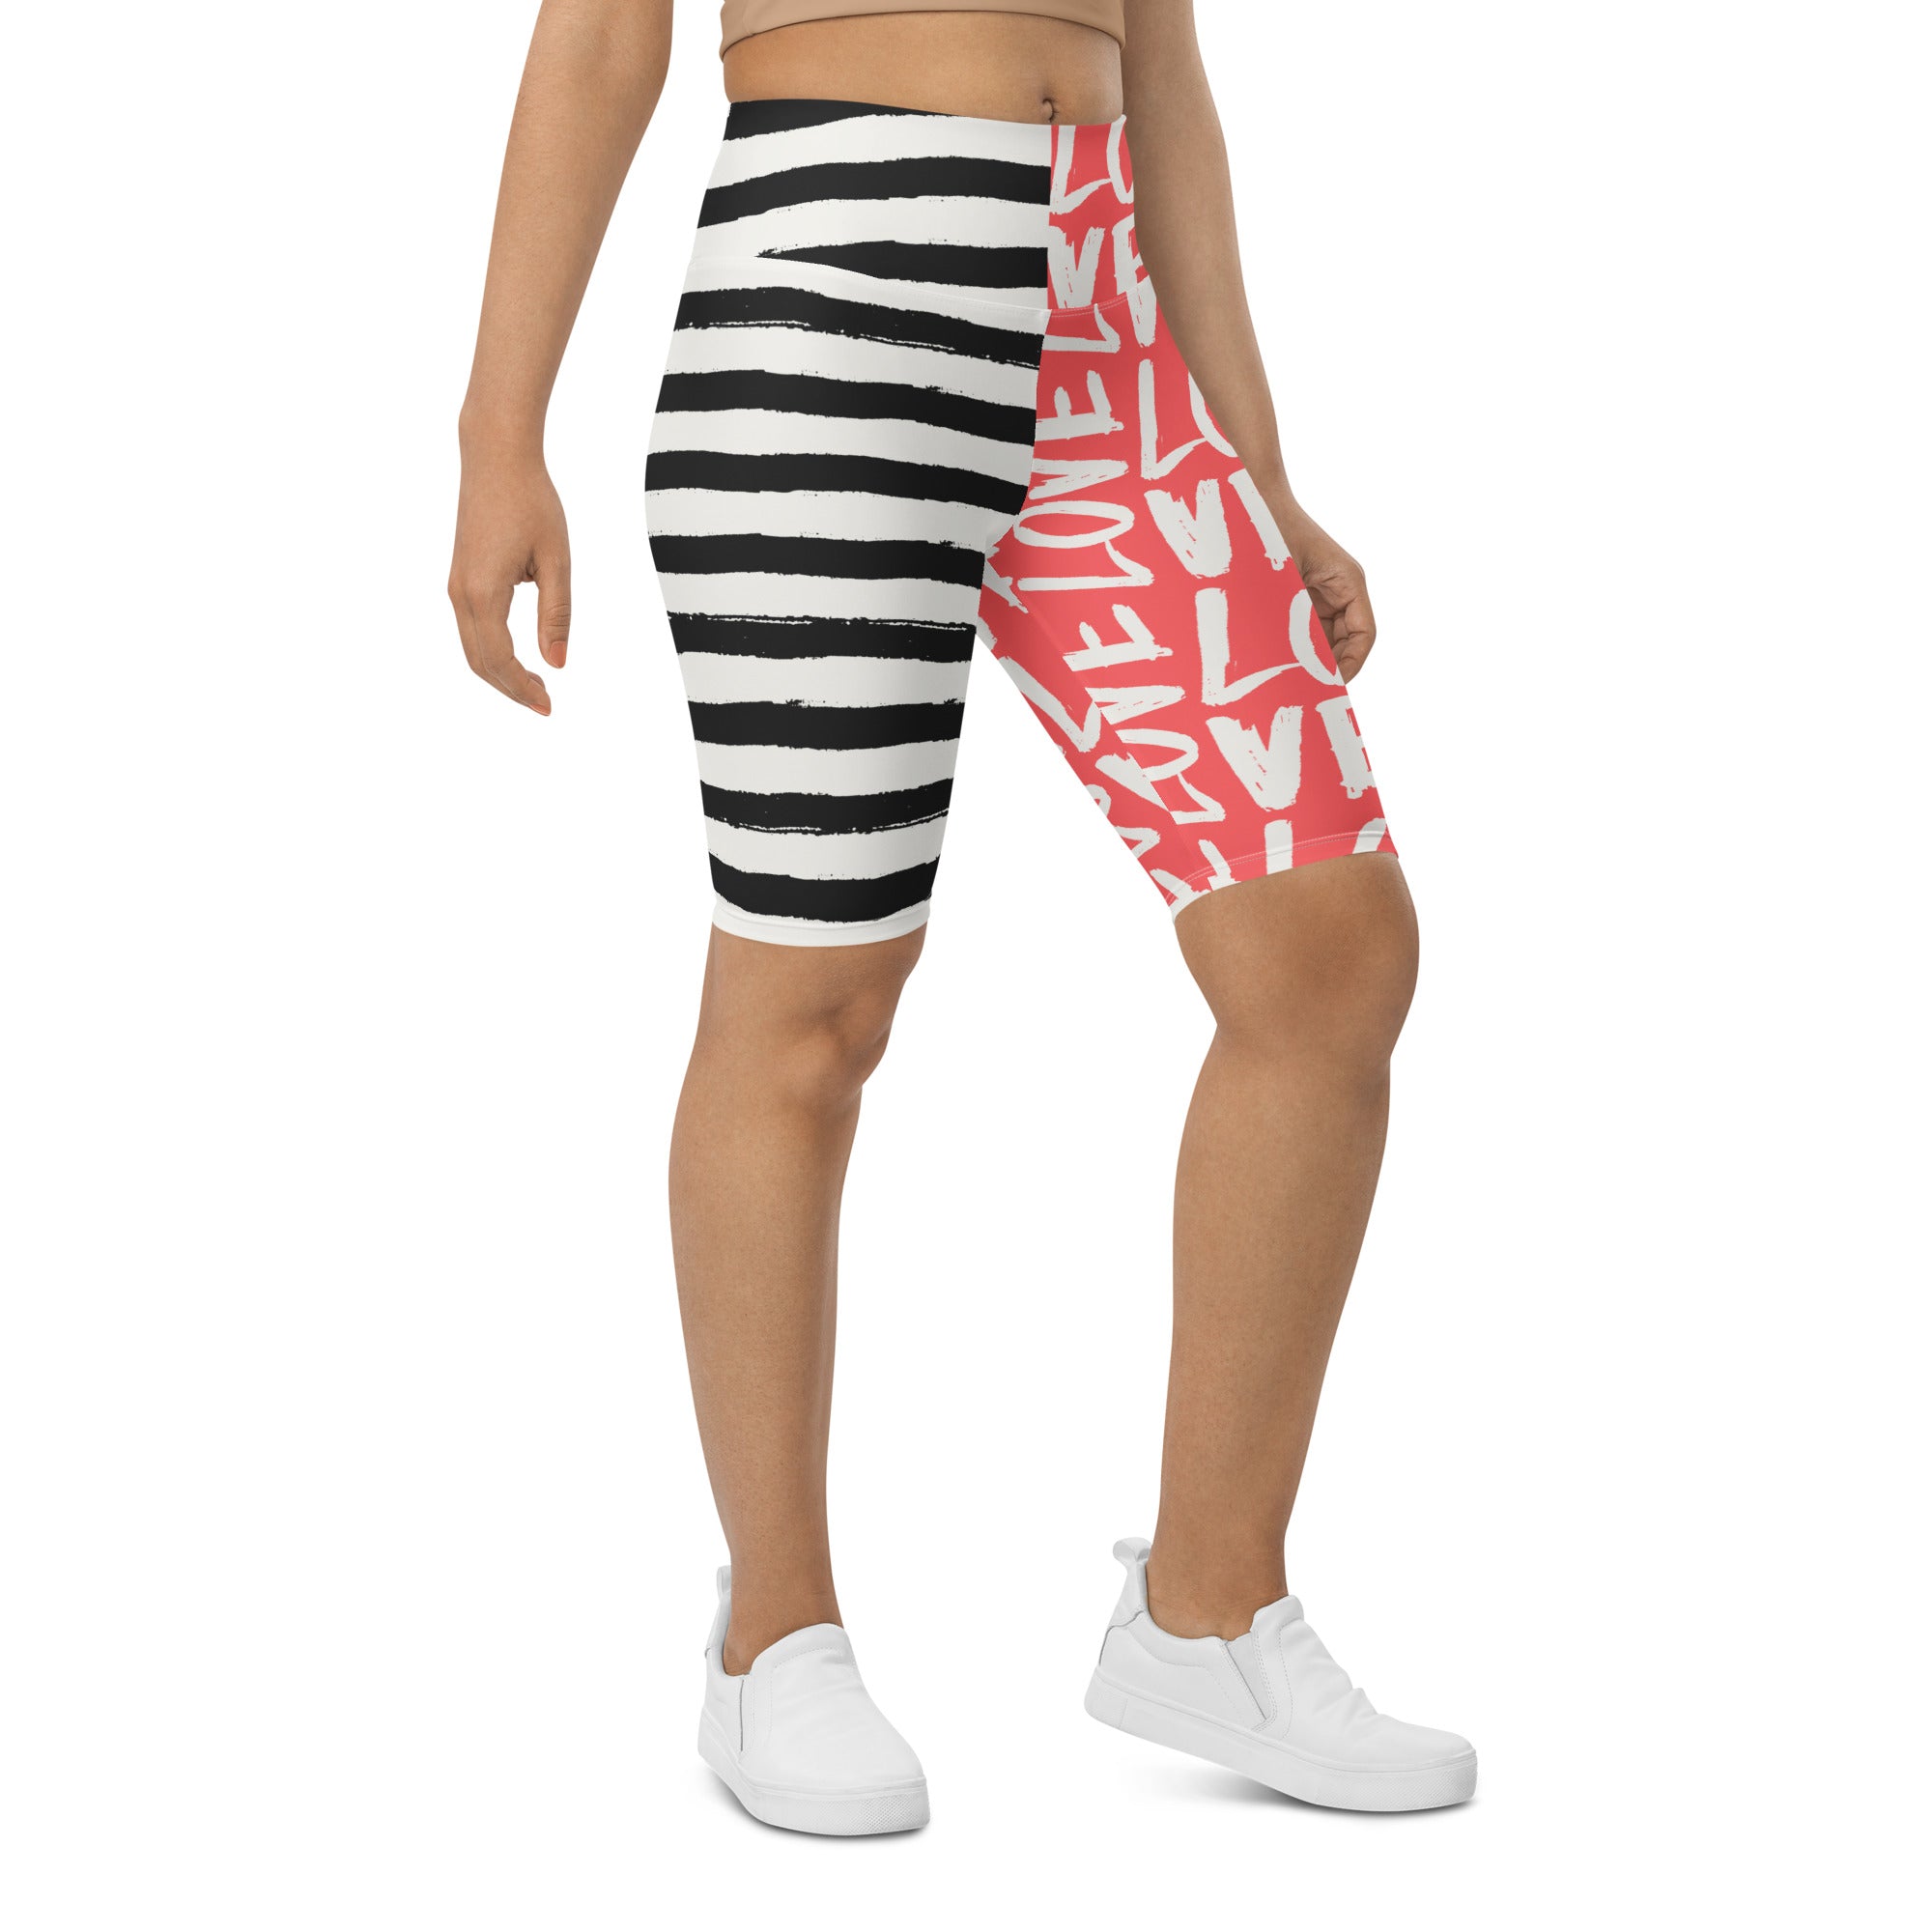 Two-Patterned Valentine's Day Biker Shorts